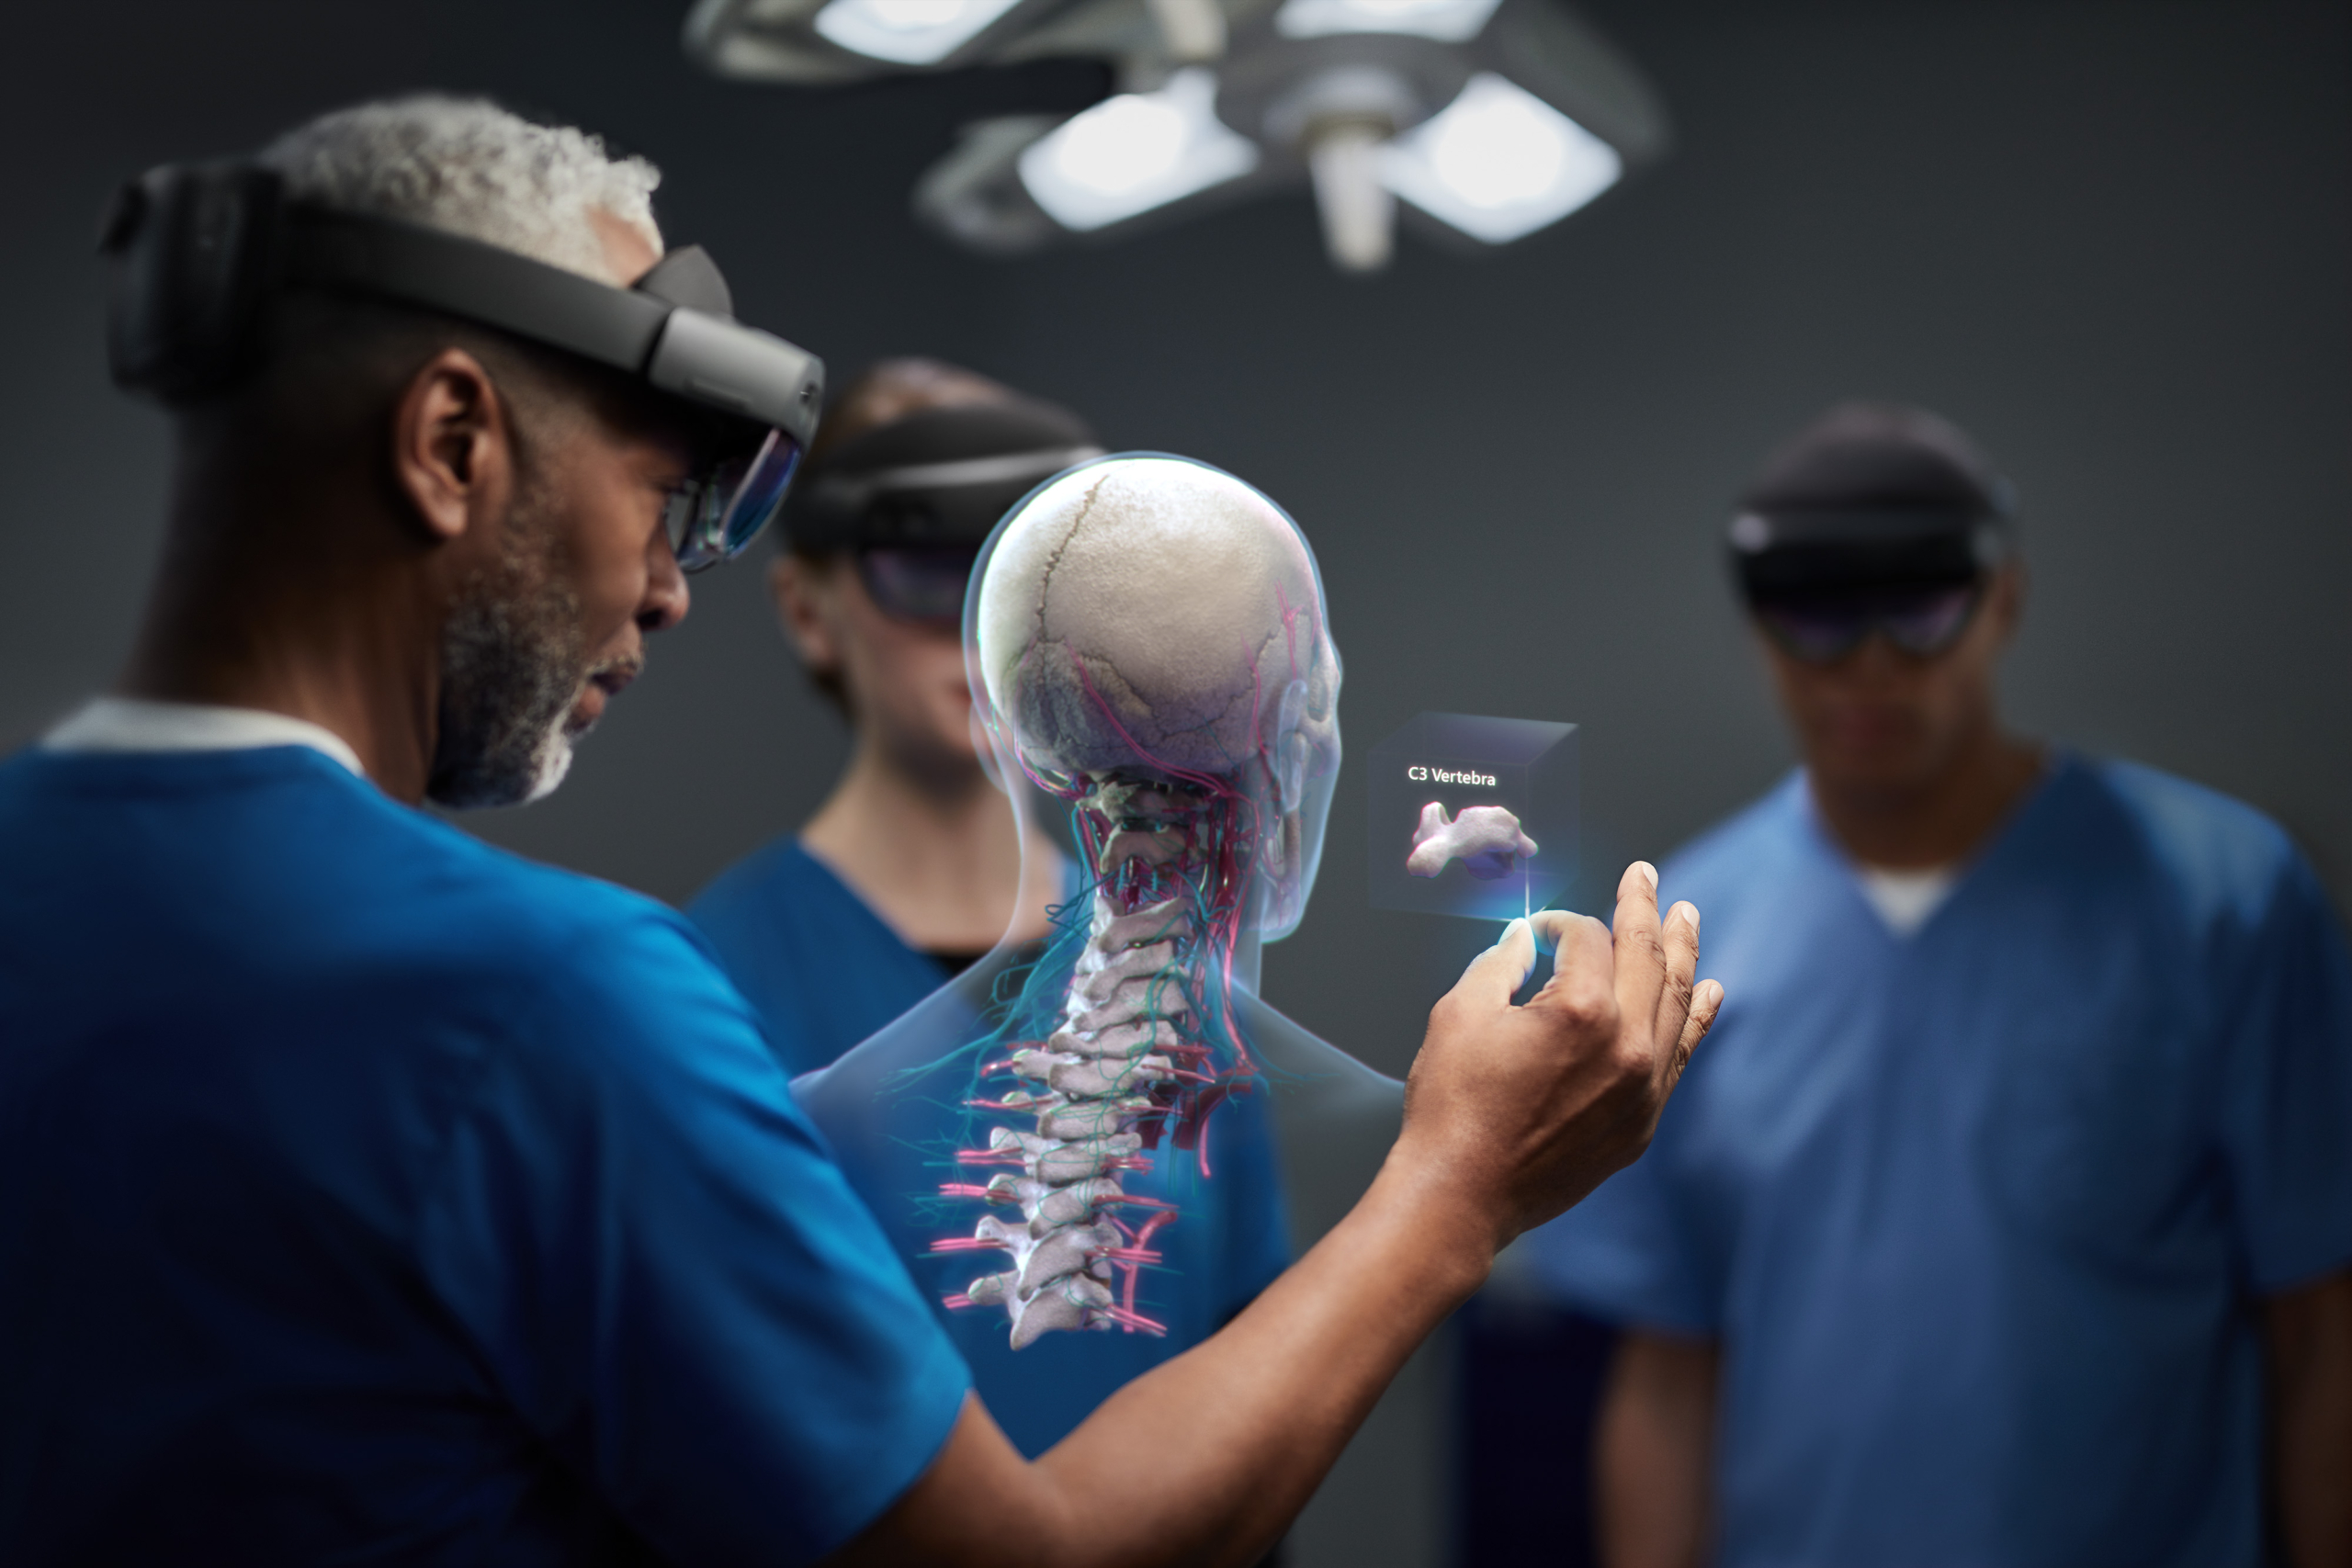 Surgeon and medical team, using HoloLens 2 to assist in an operating theatre.